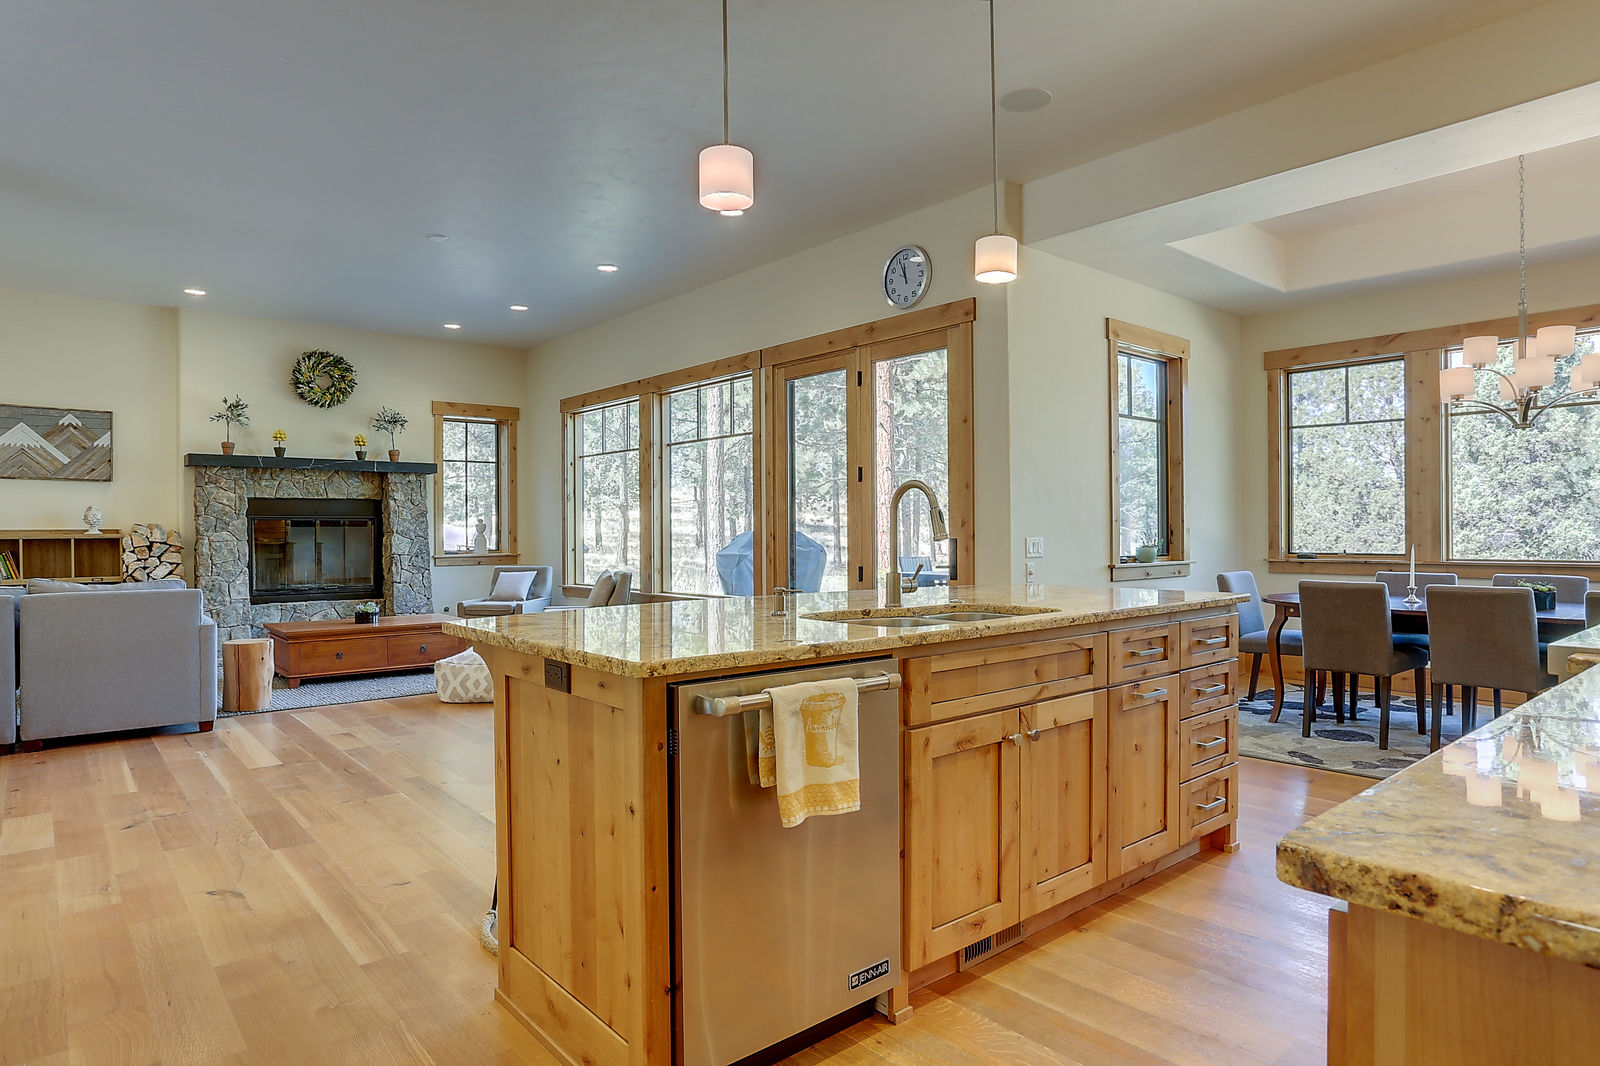 Beautiful kitchen in our vacation homes in bend